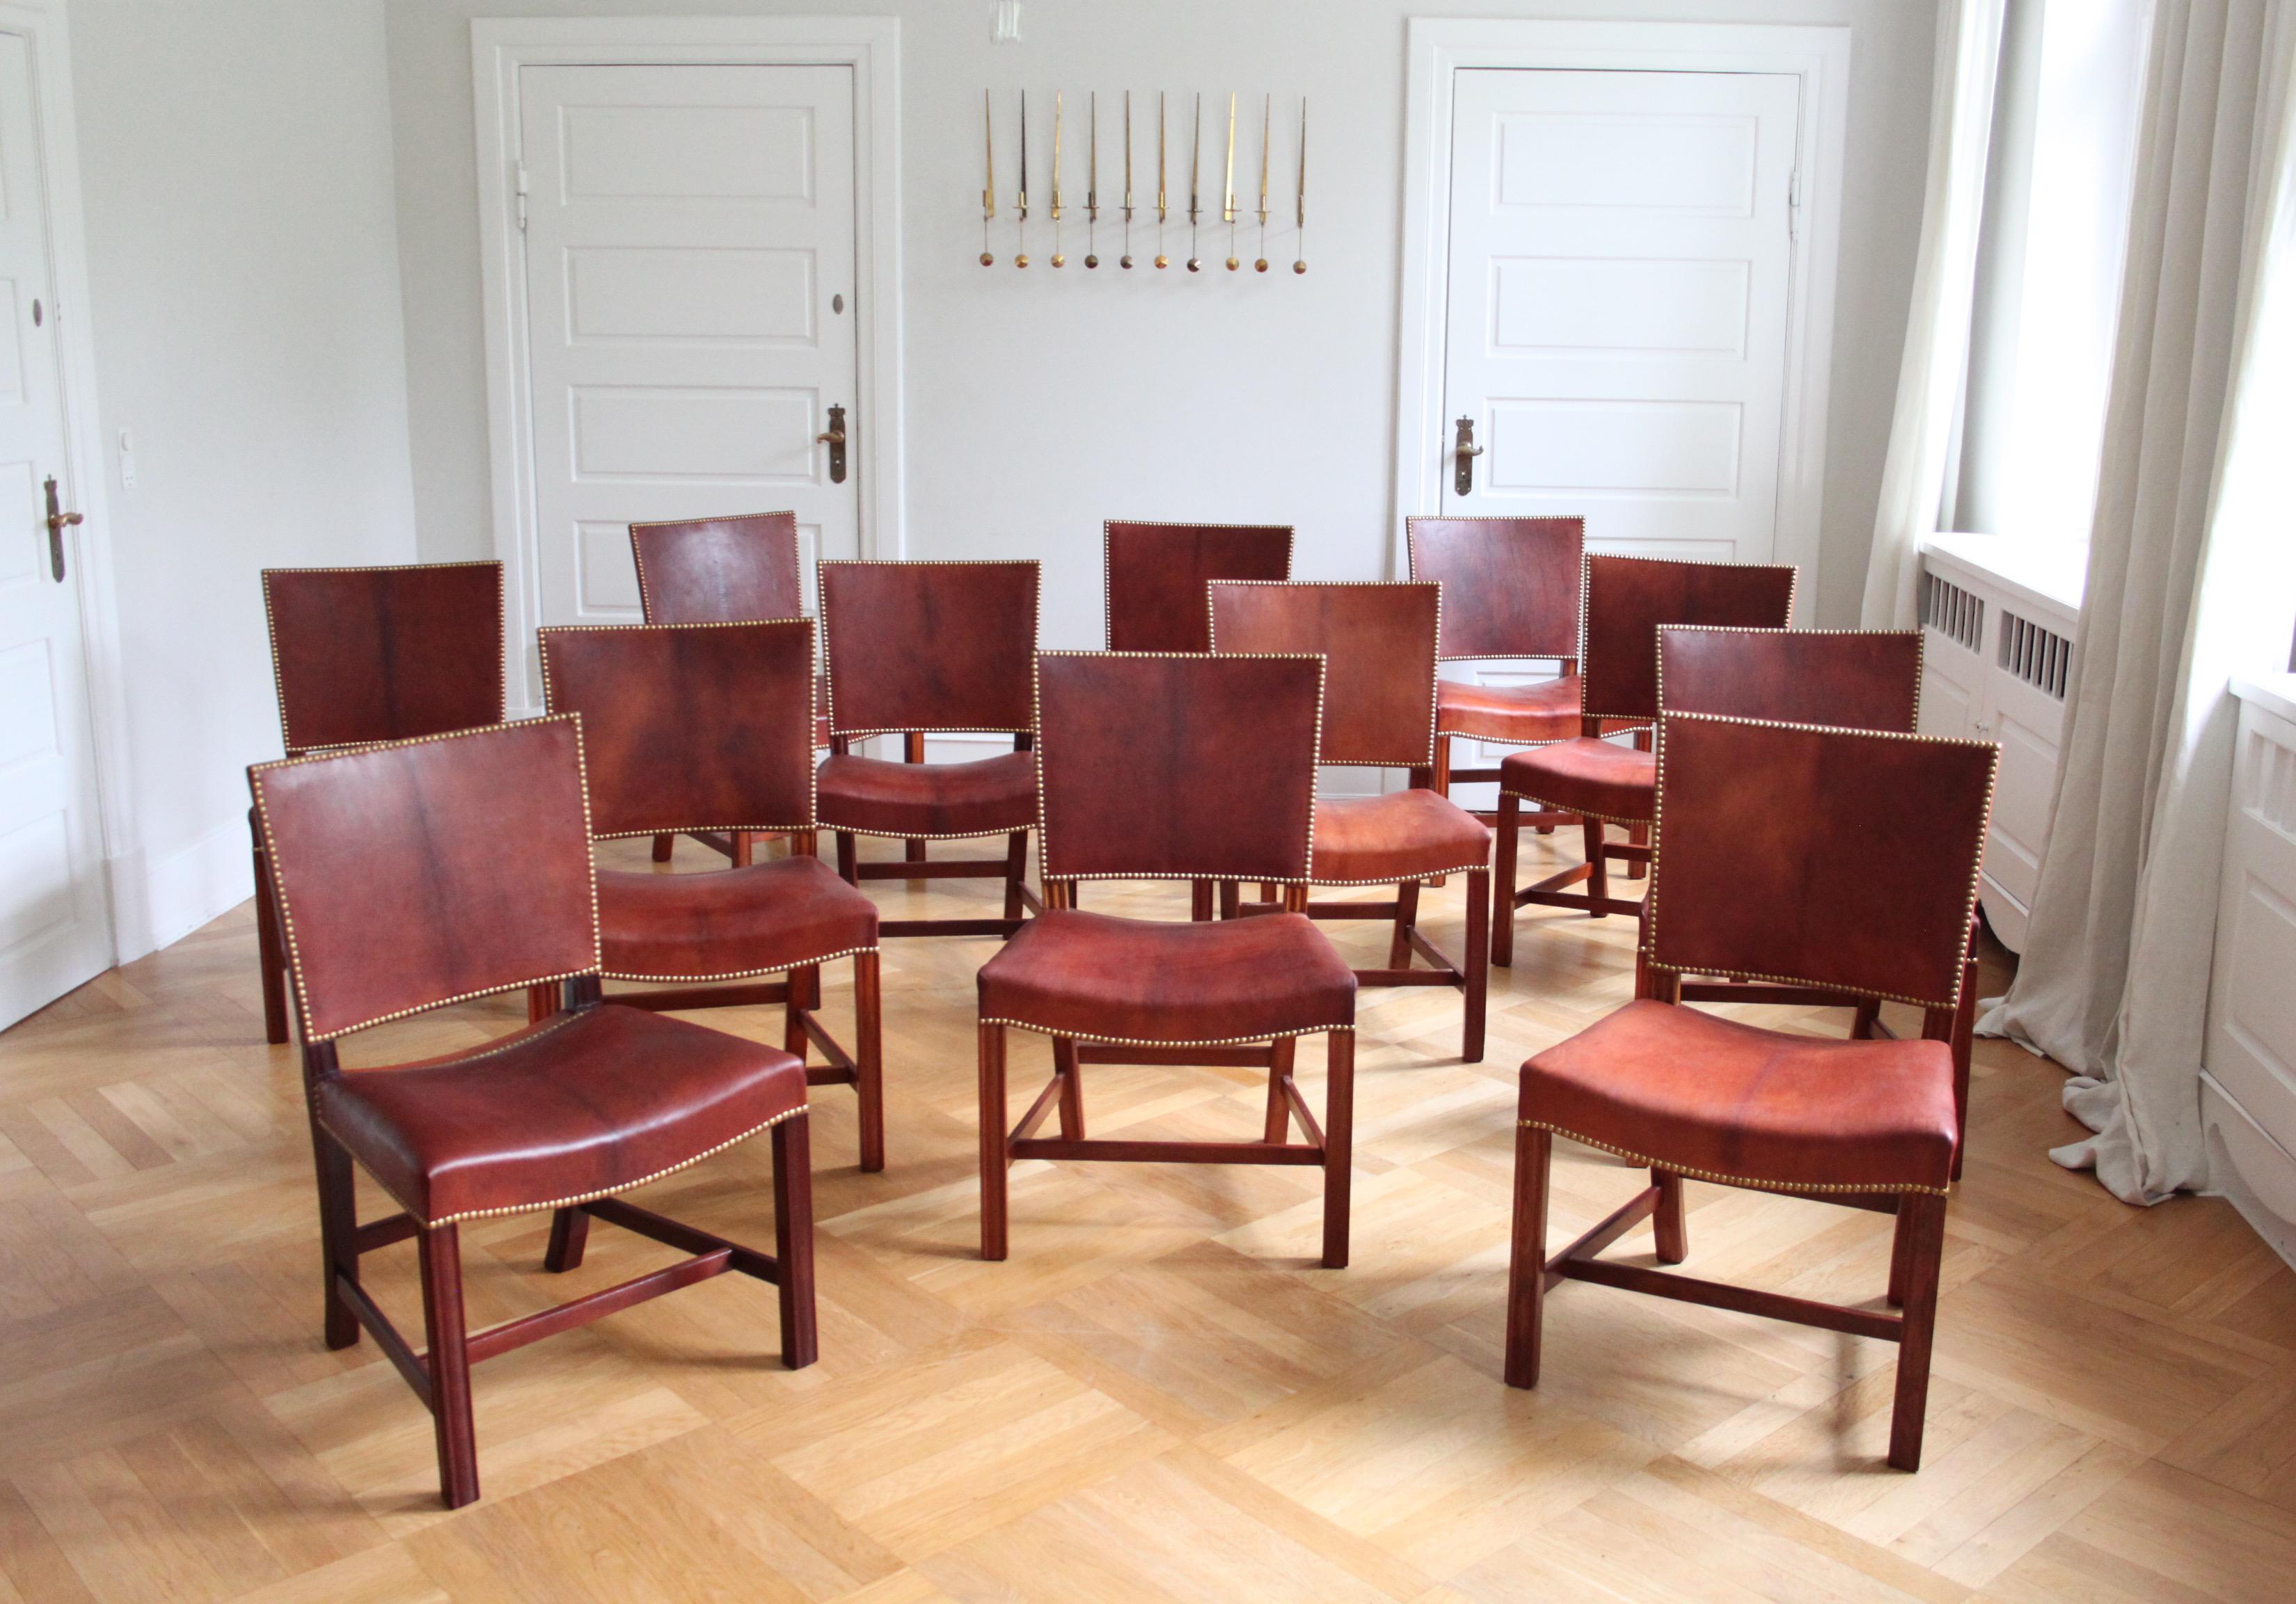 Set of Twelve Kaare Klint Red Chairs, Rud Rasmussen, Niger Leather and Mahogany For Sale 5